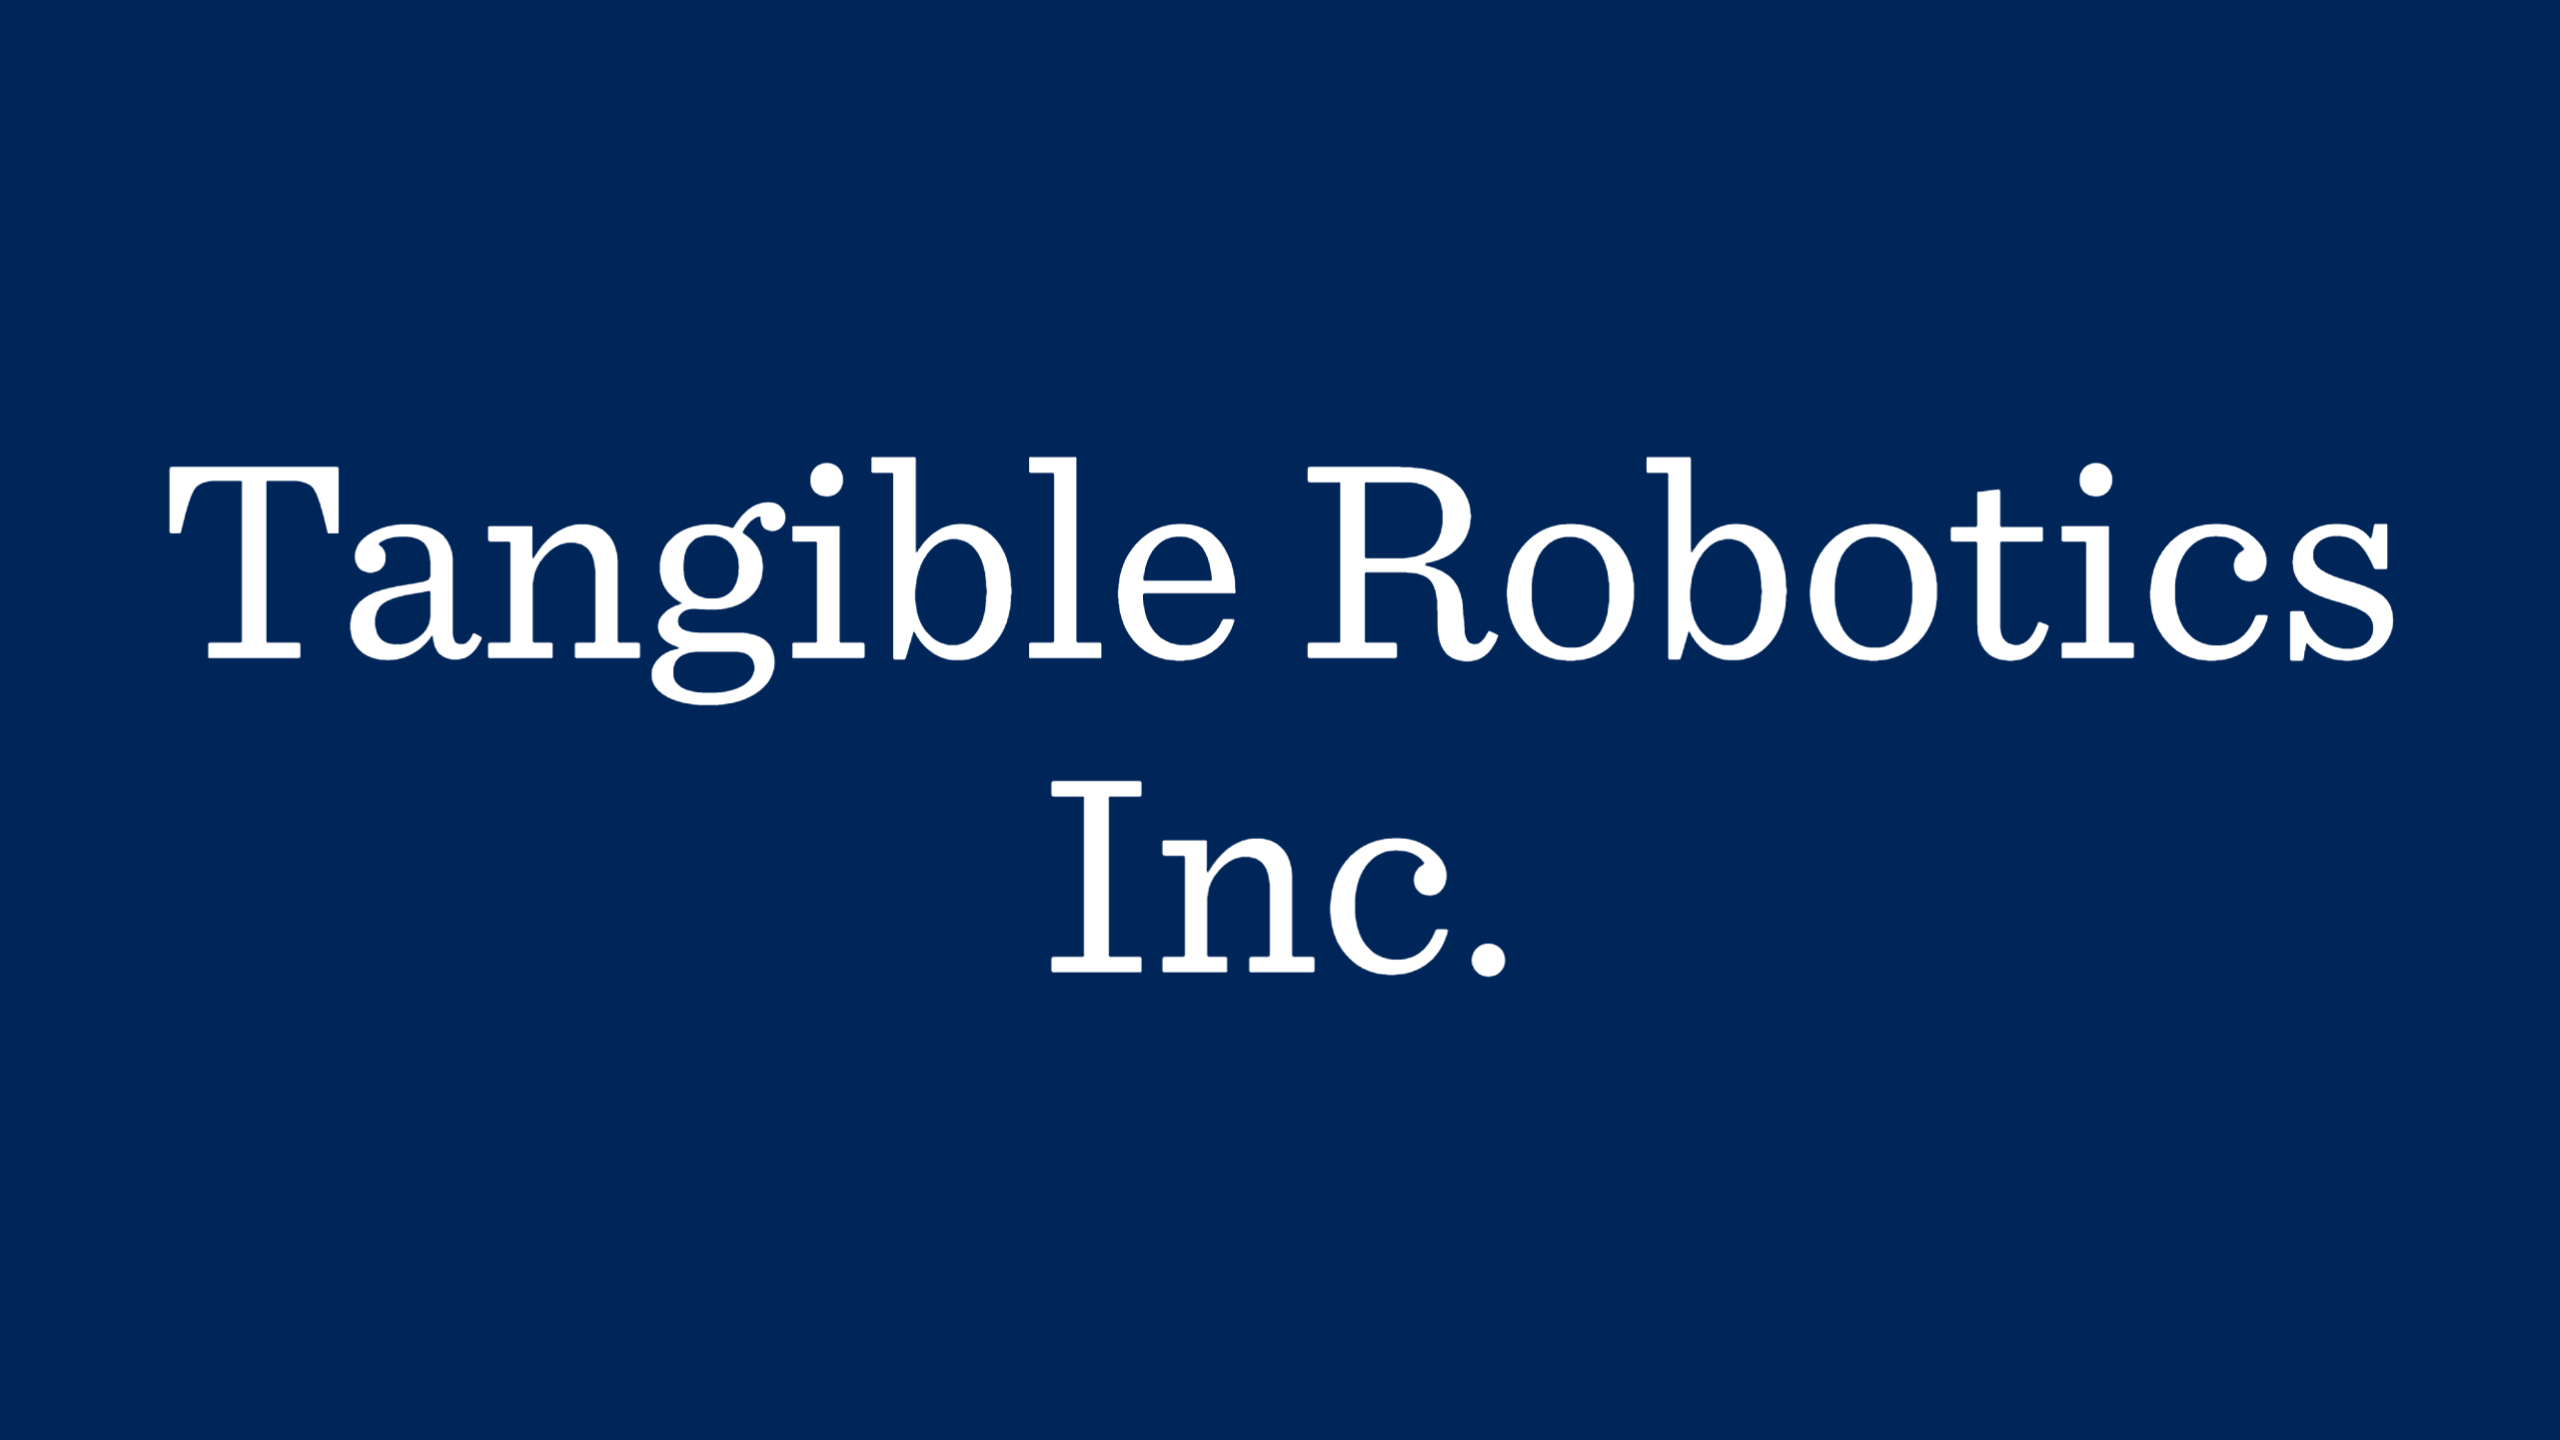 This is a photo of the Tangible Robotics Inc logo.